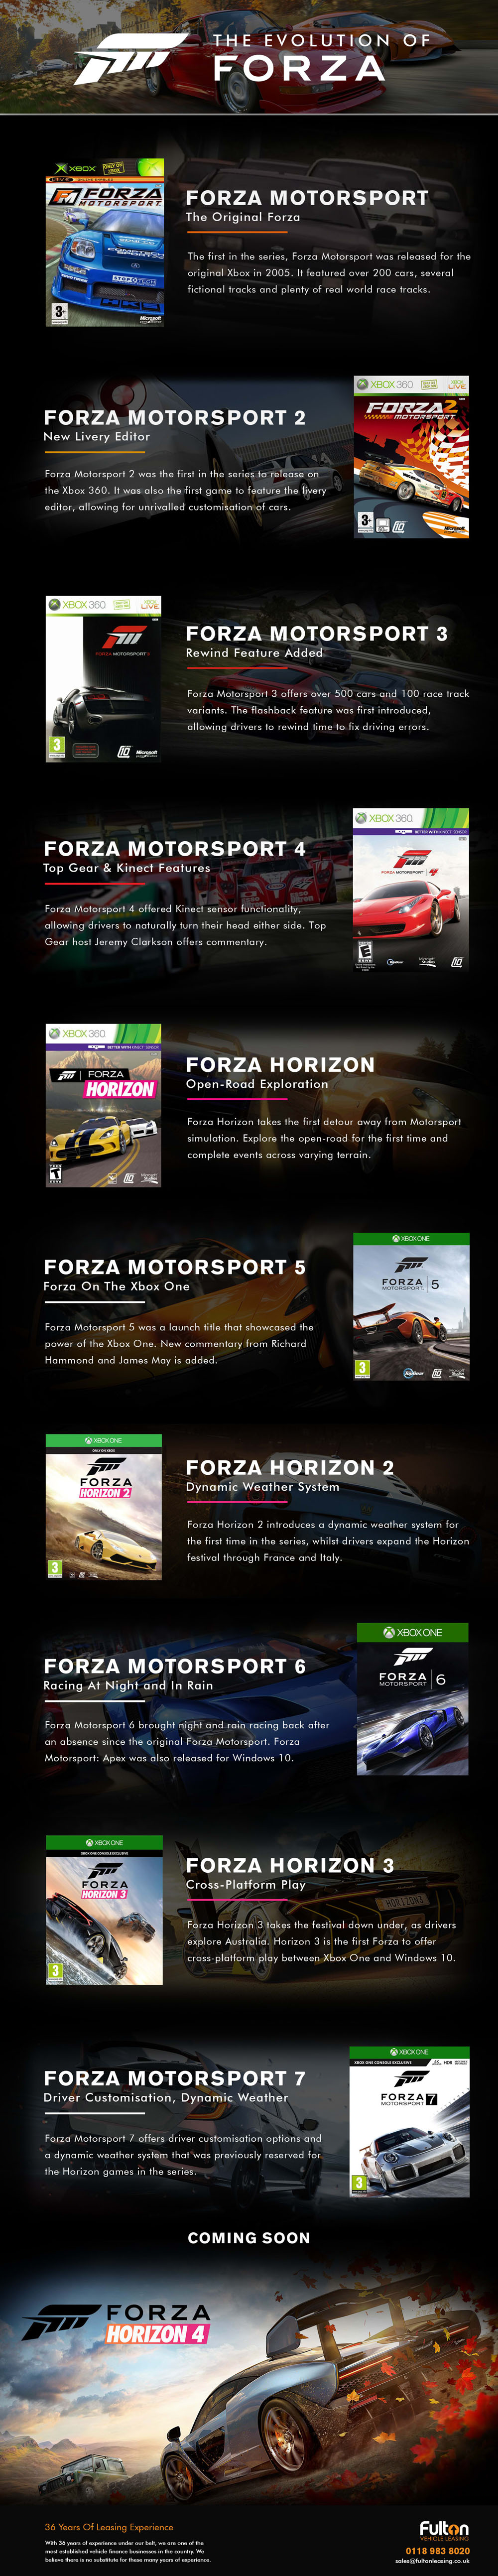 The Evolution of Forza